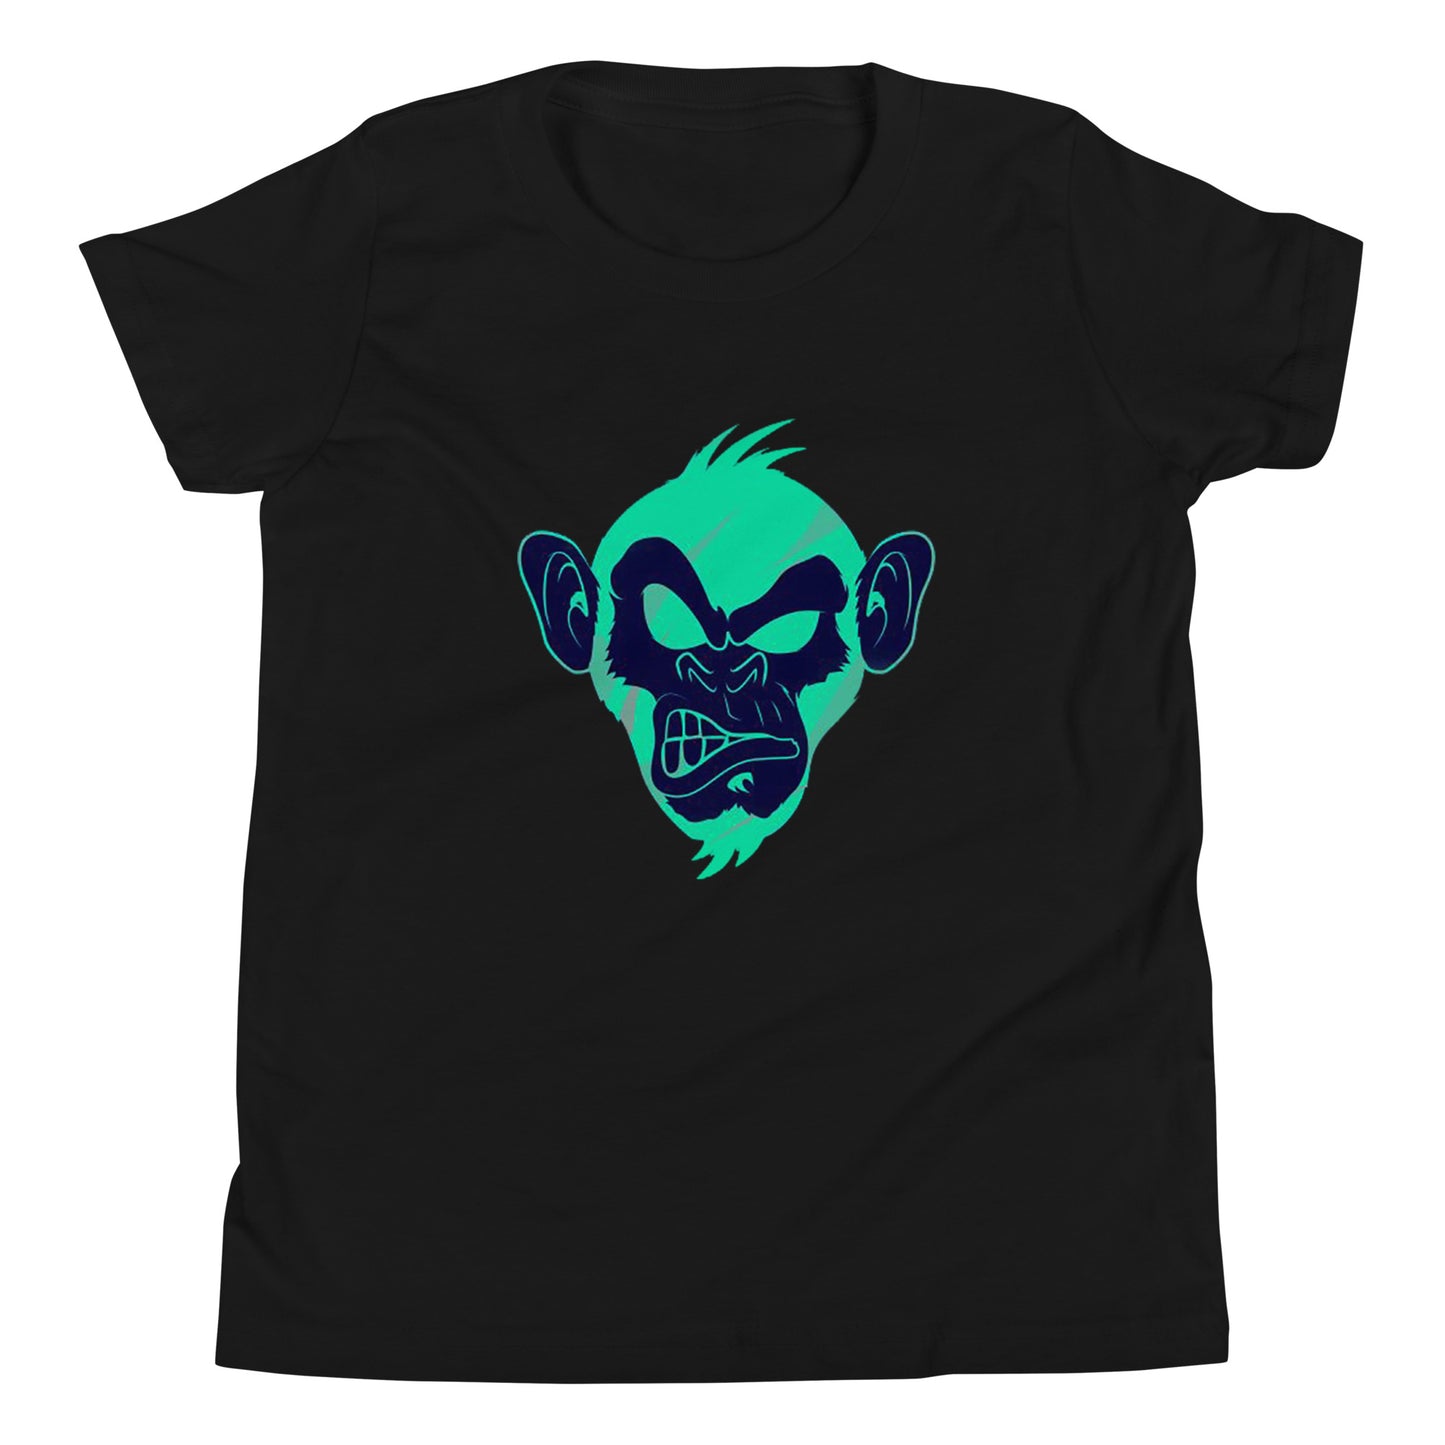 Black T-shirt with print of a Cool monkey in black light green